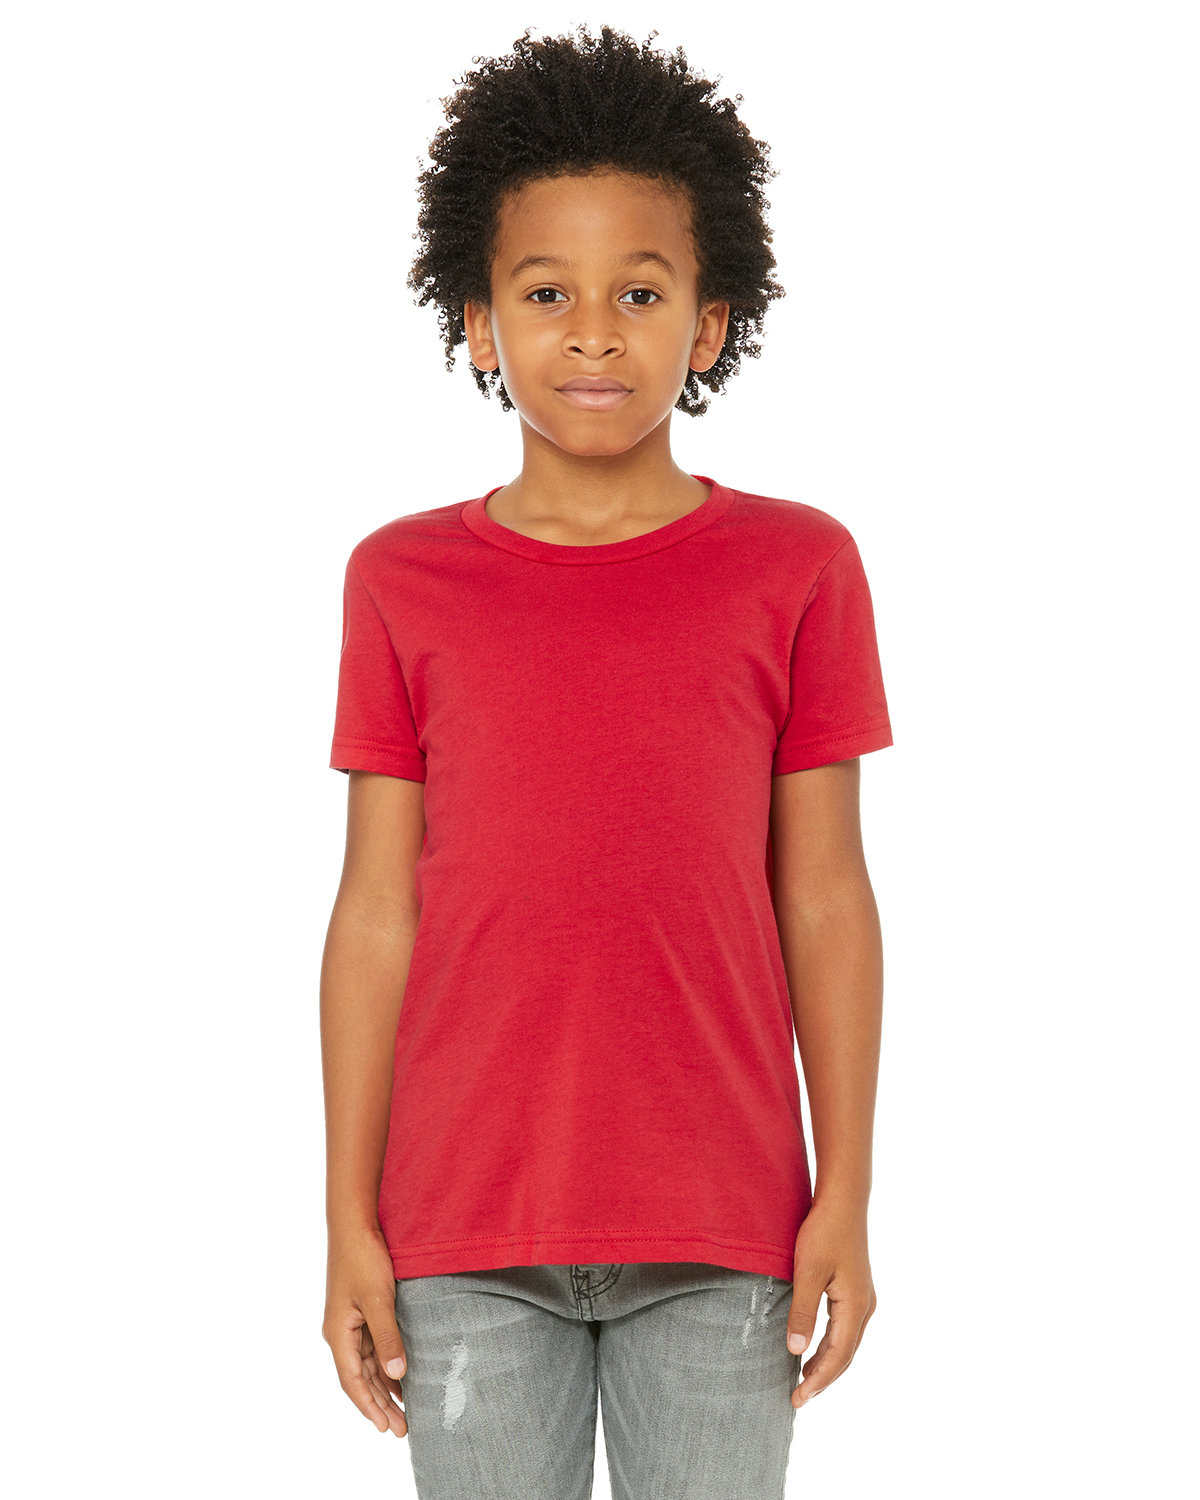 Bella + Canvas Youth Jersey T-Shirt RED 